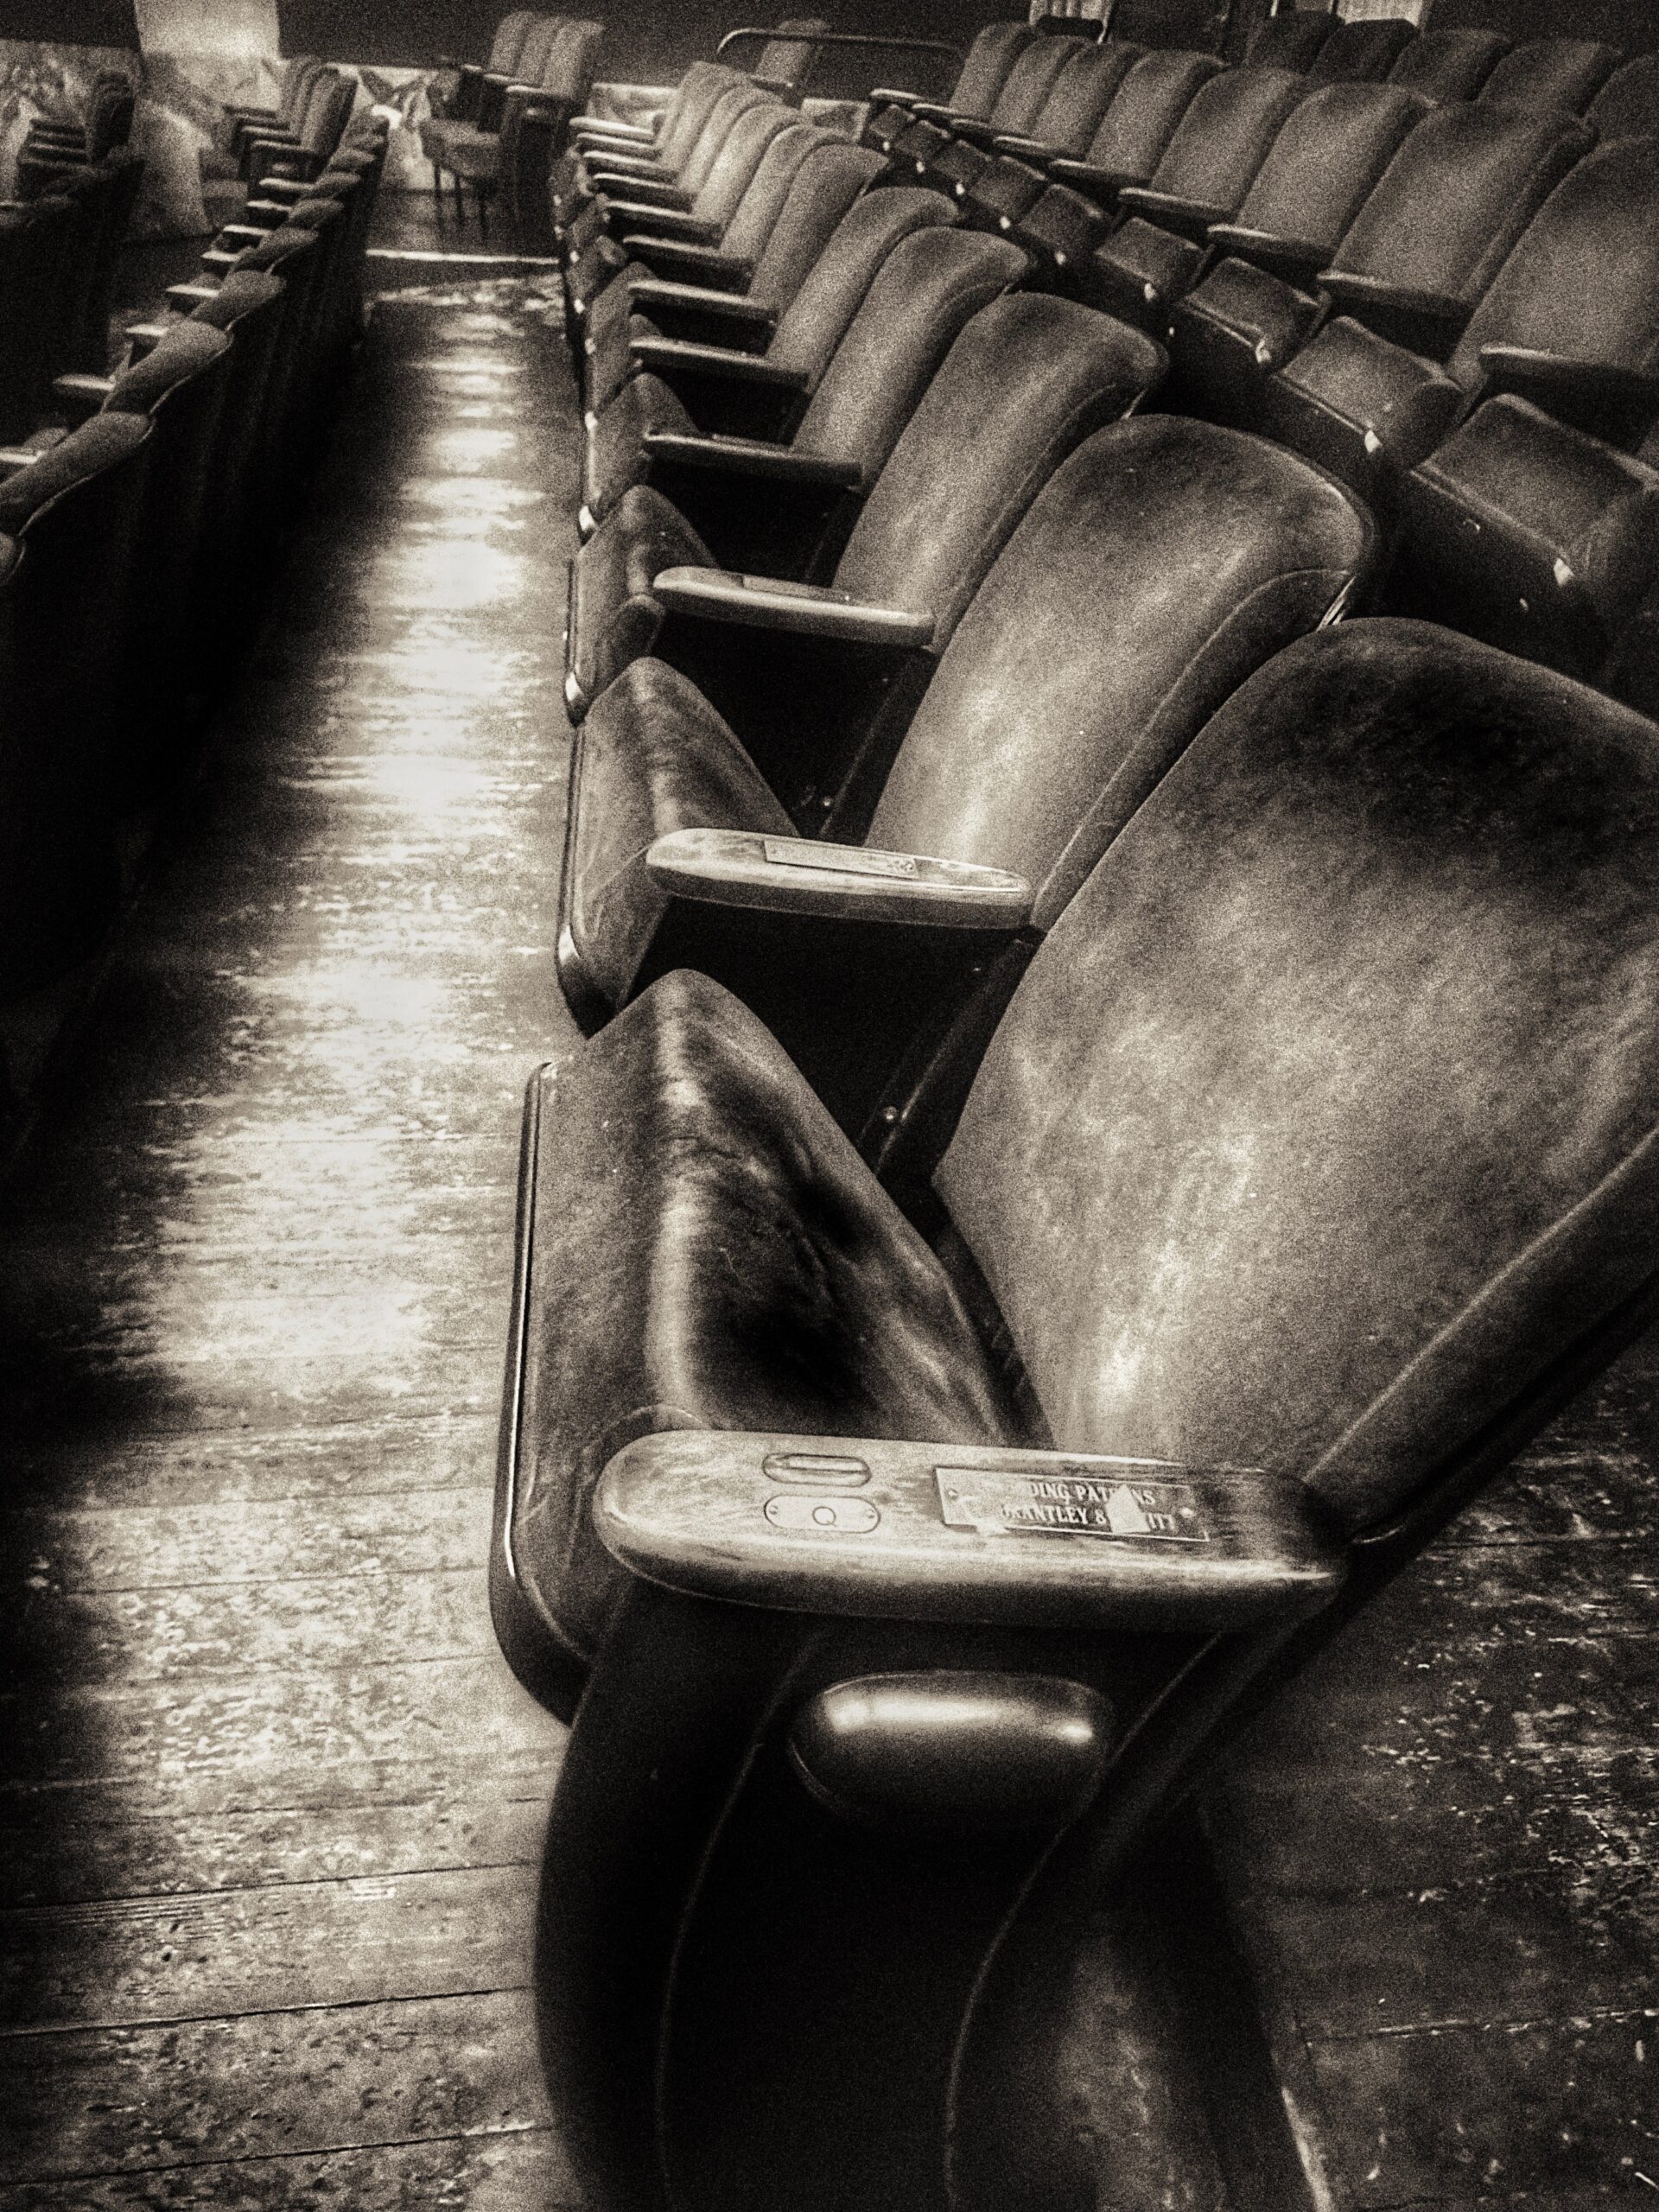 Black and white photograph of rows of empty seats in an auditorium.